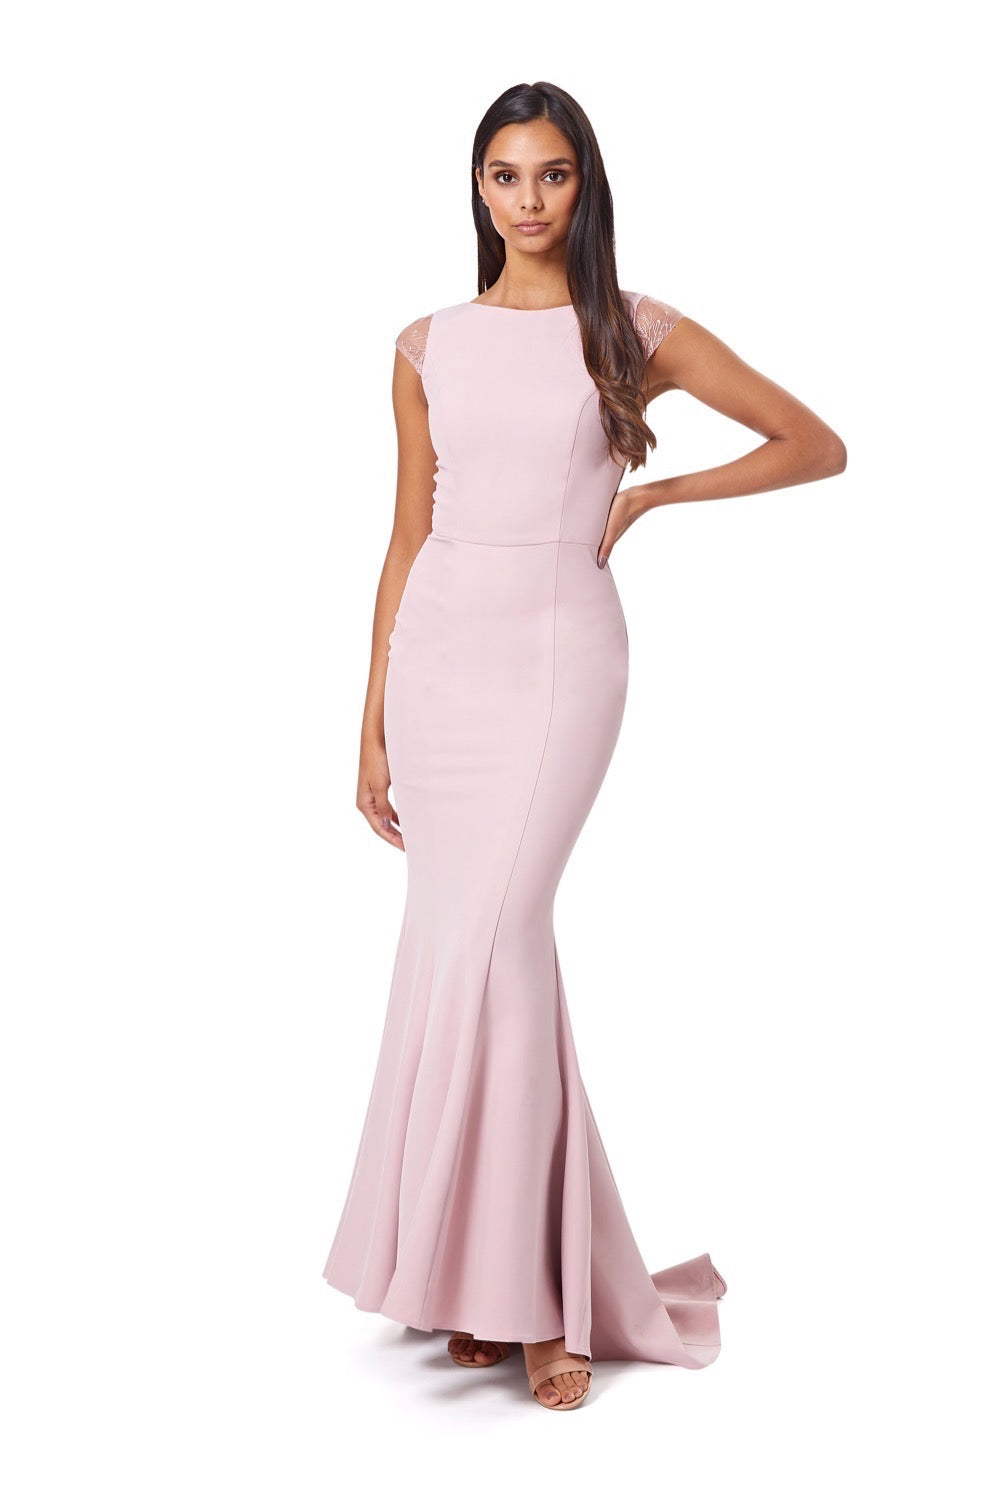 Jarlo Masa fishtail pink maxi dress with lace cap sleeves and embroidered back